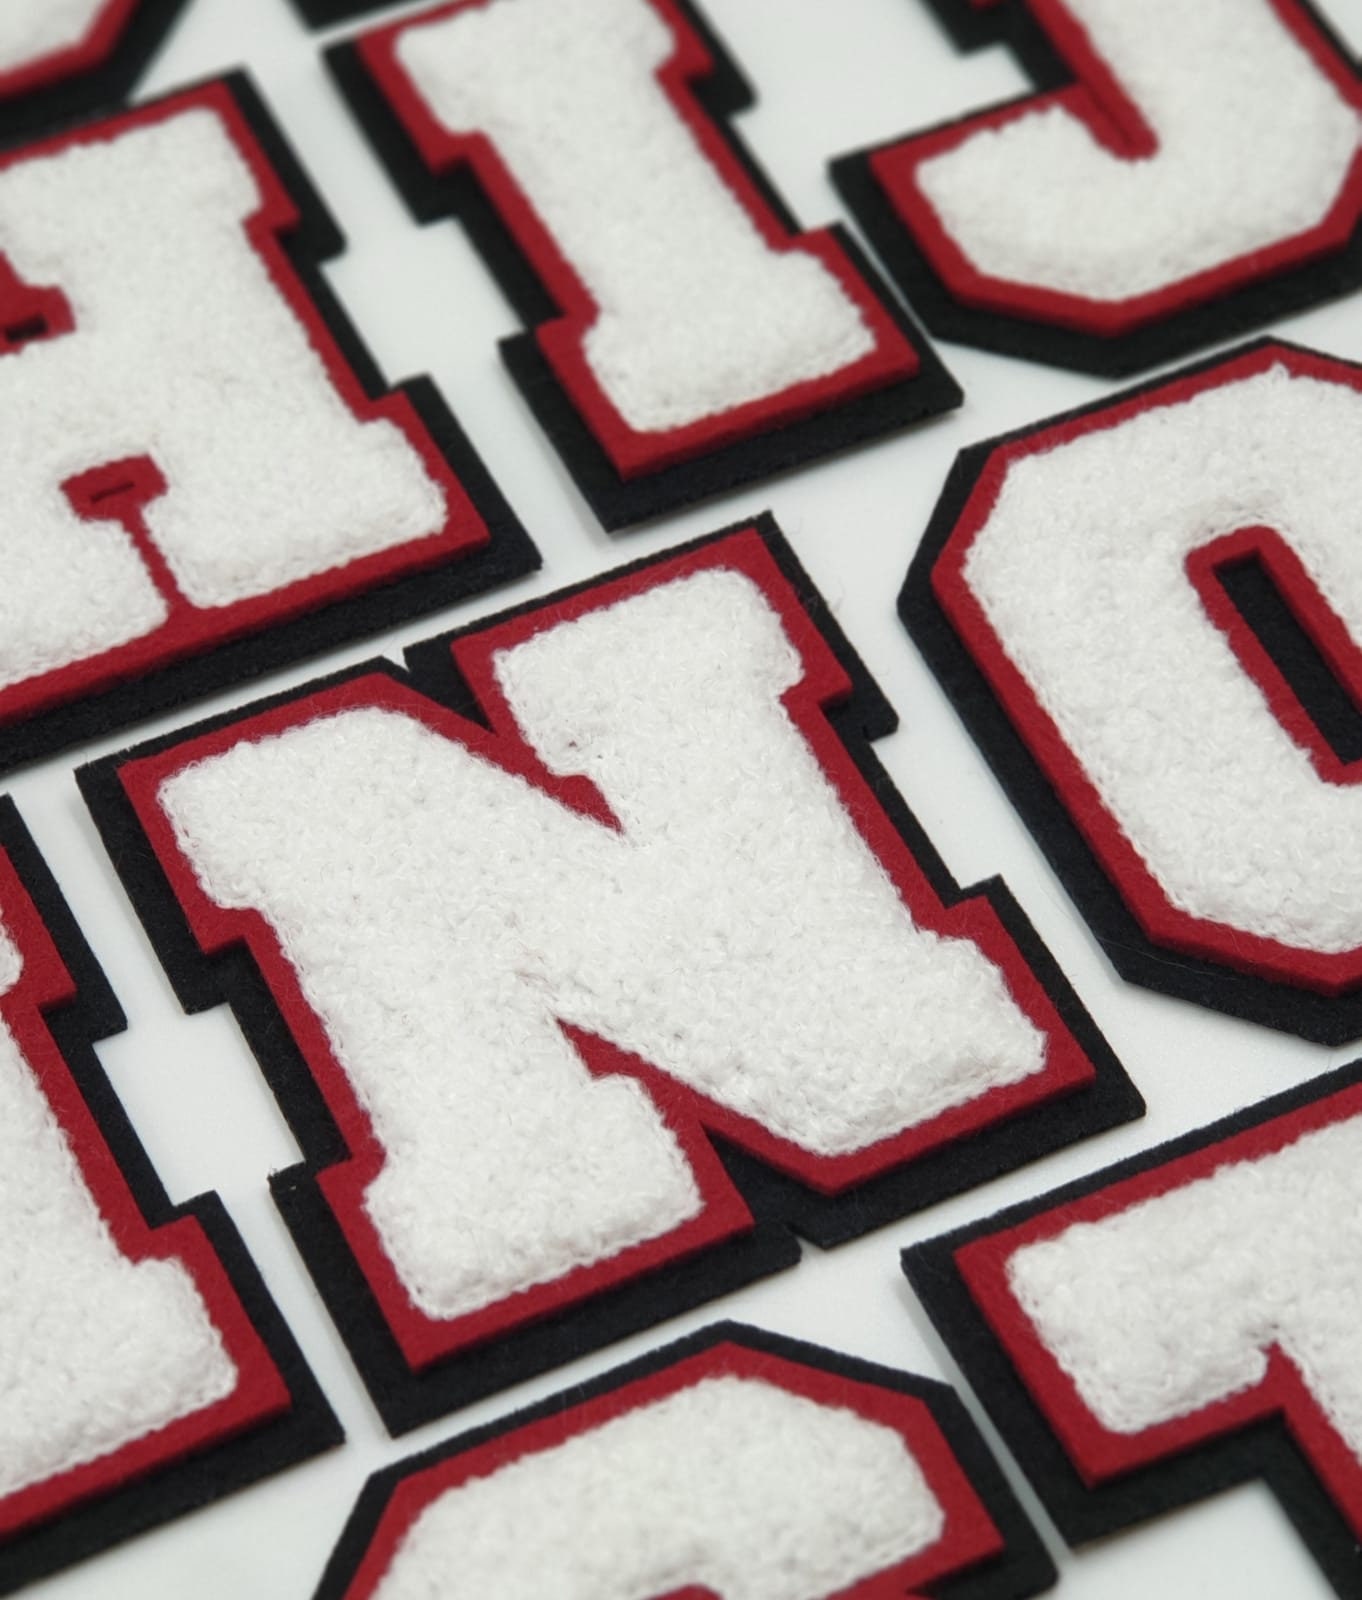 Letters Iron On Letters - Varsity Chenille Q-R-S-T Patches - Iron Adhesive  or Sew On Appliques - Decorative 5 Red Letters with White Border